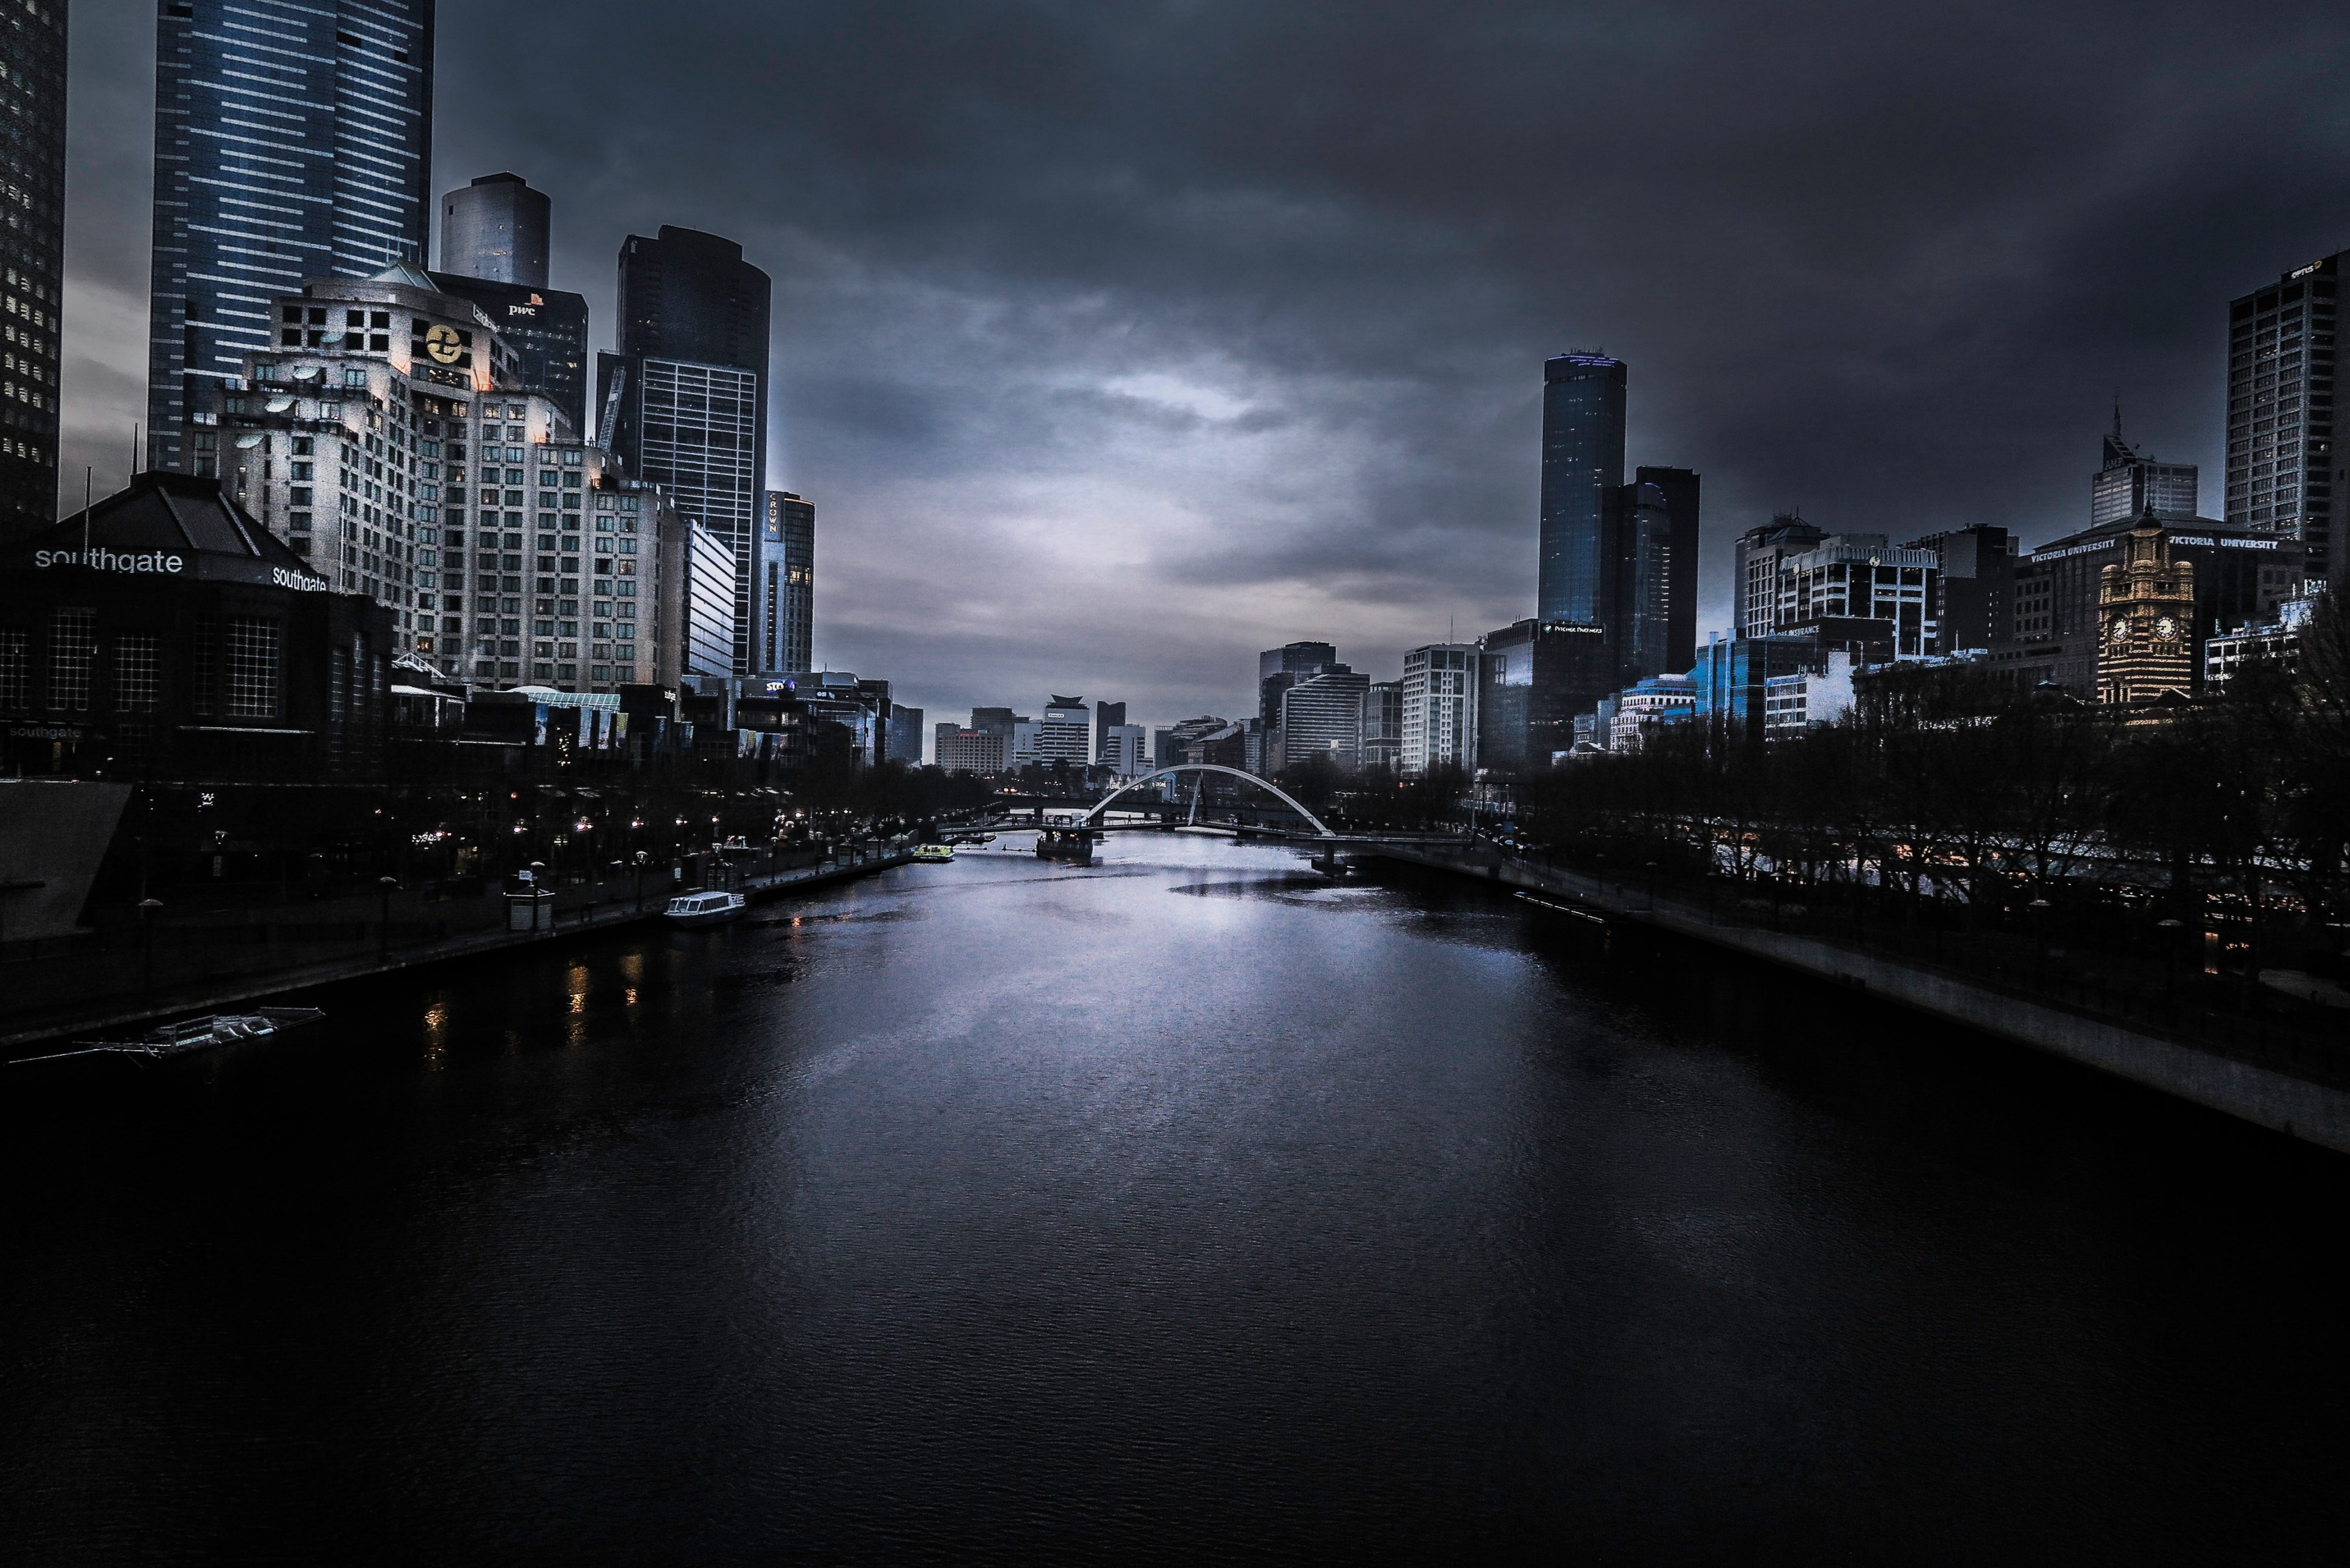 Wallpaper id melbourne as seen over the water as day fades water at night k wallpaper free download